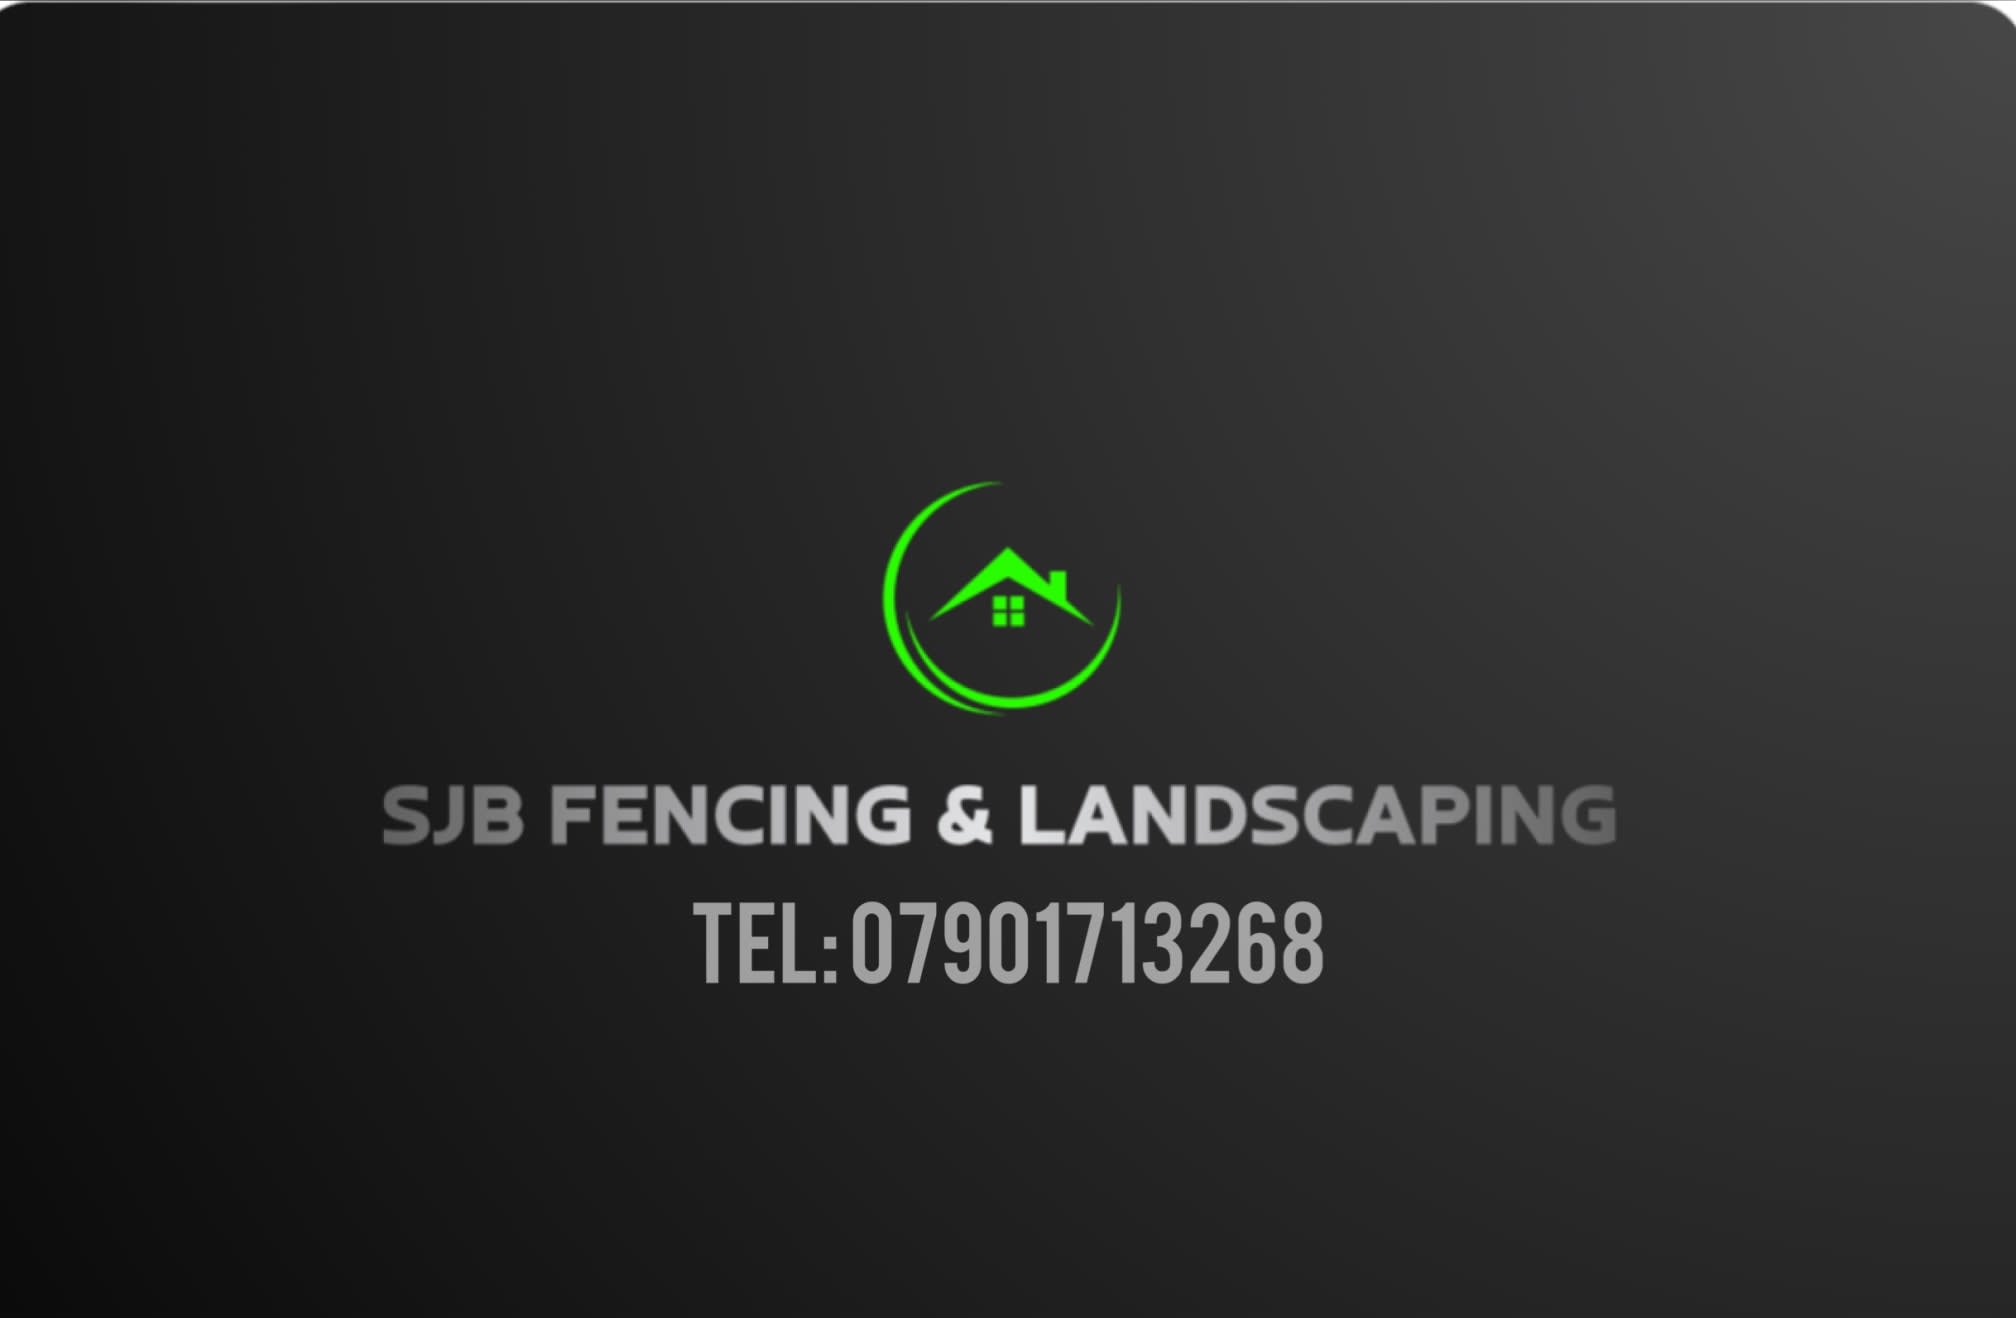 Images SJB Fencing & Landscaping